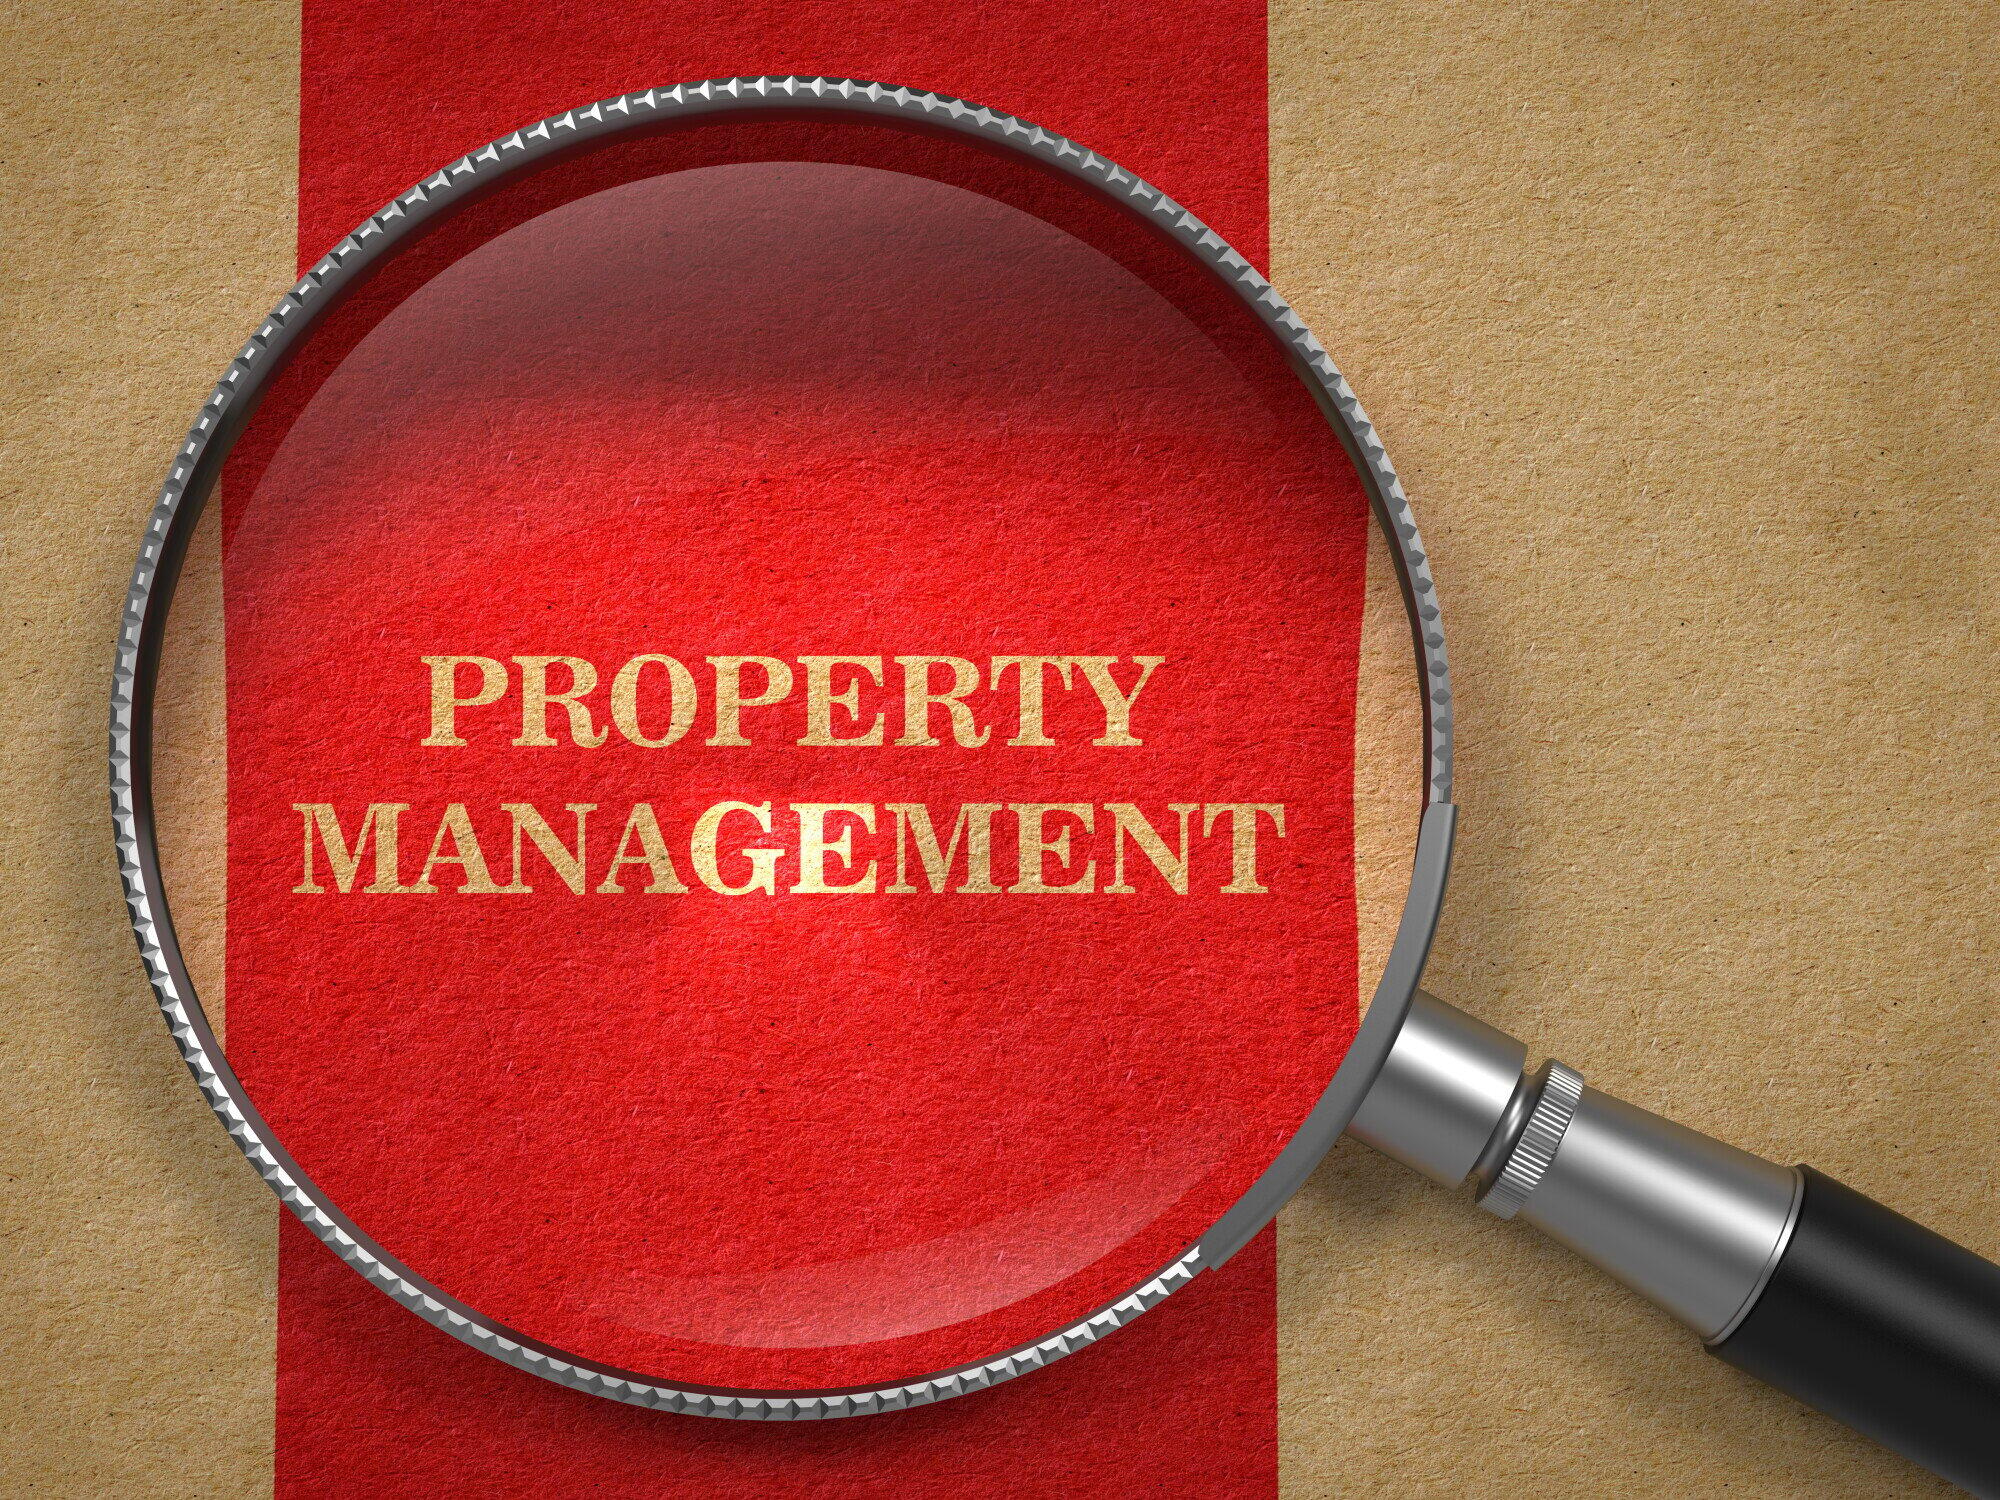 Boston Property Management: Is In-House or Third-Party Better?